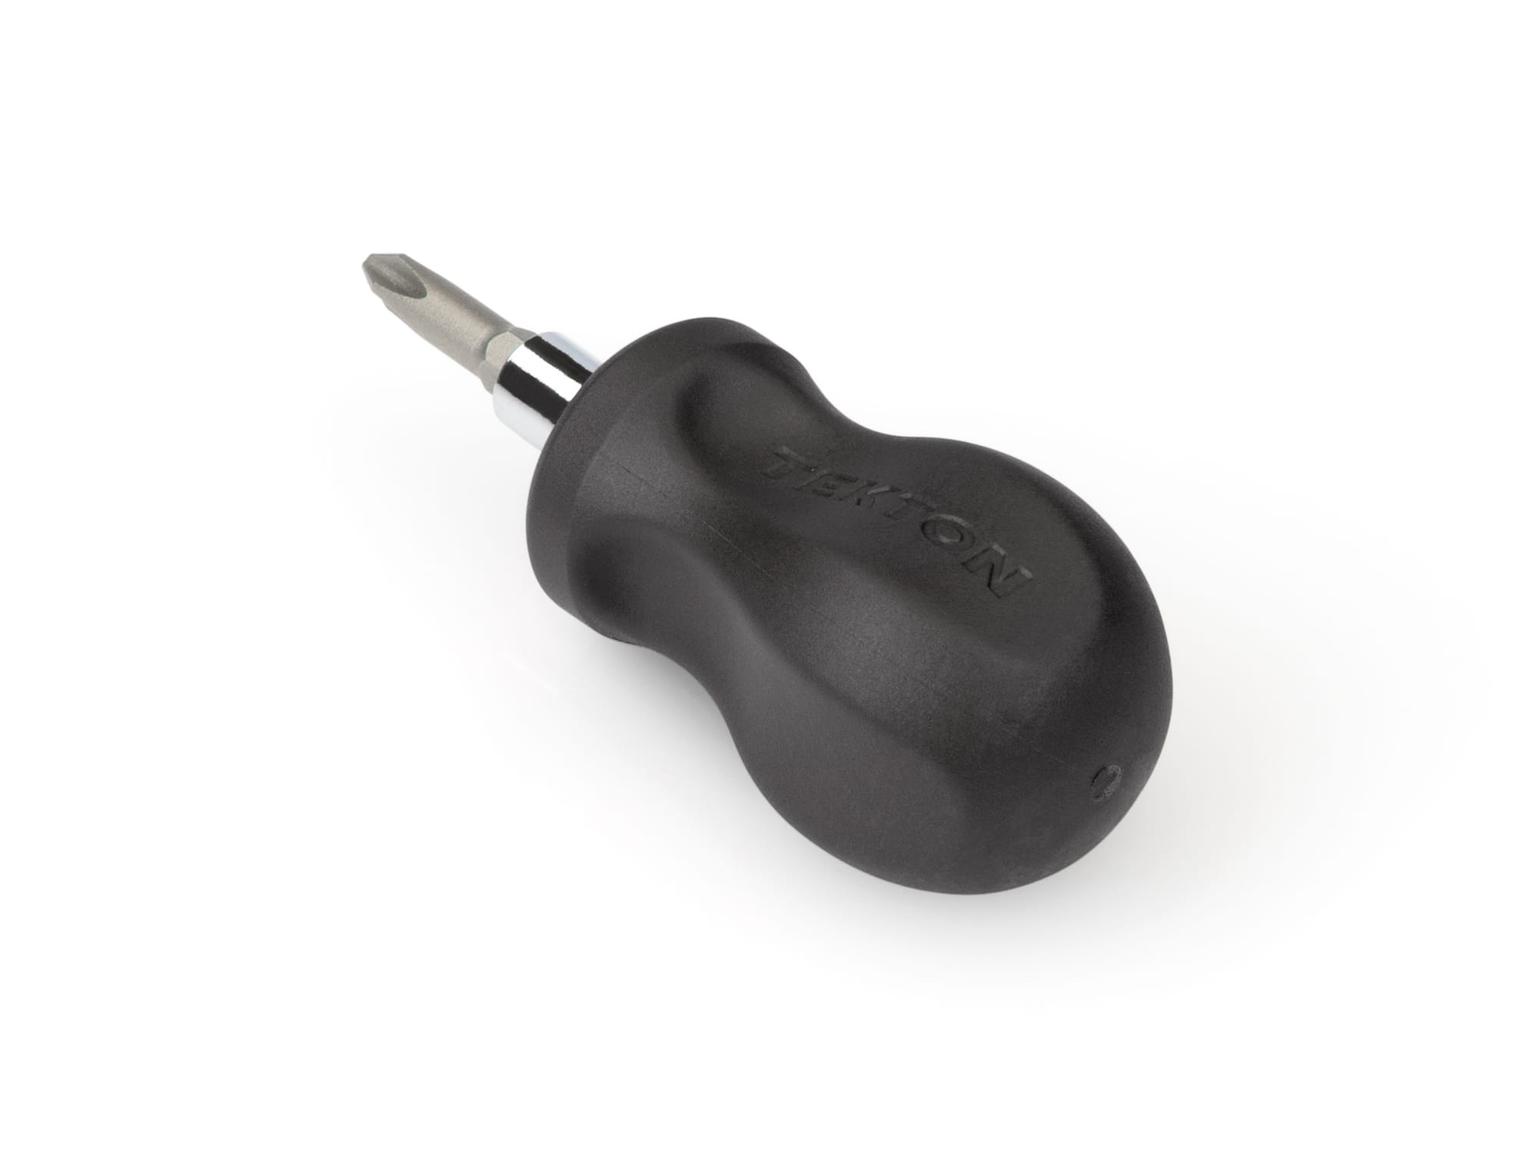 TEKTON DMT13002-T 3-in-1 Stubby Phillips/Slotted Driver (#2 x 1/4 in., Black)